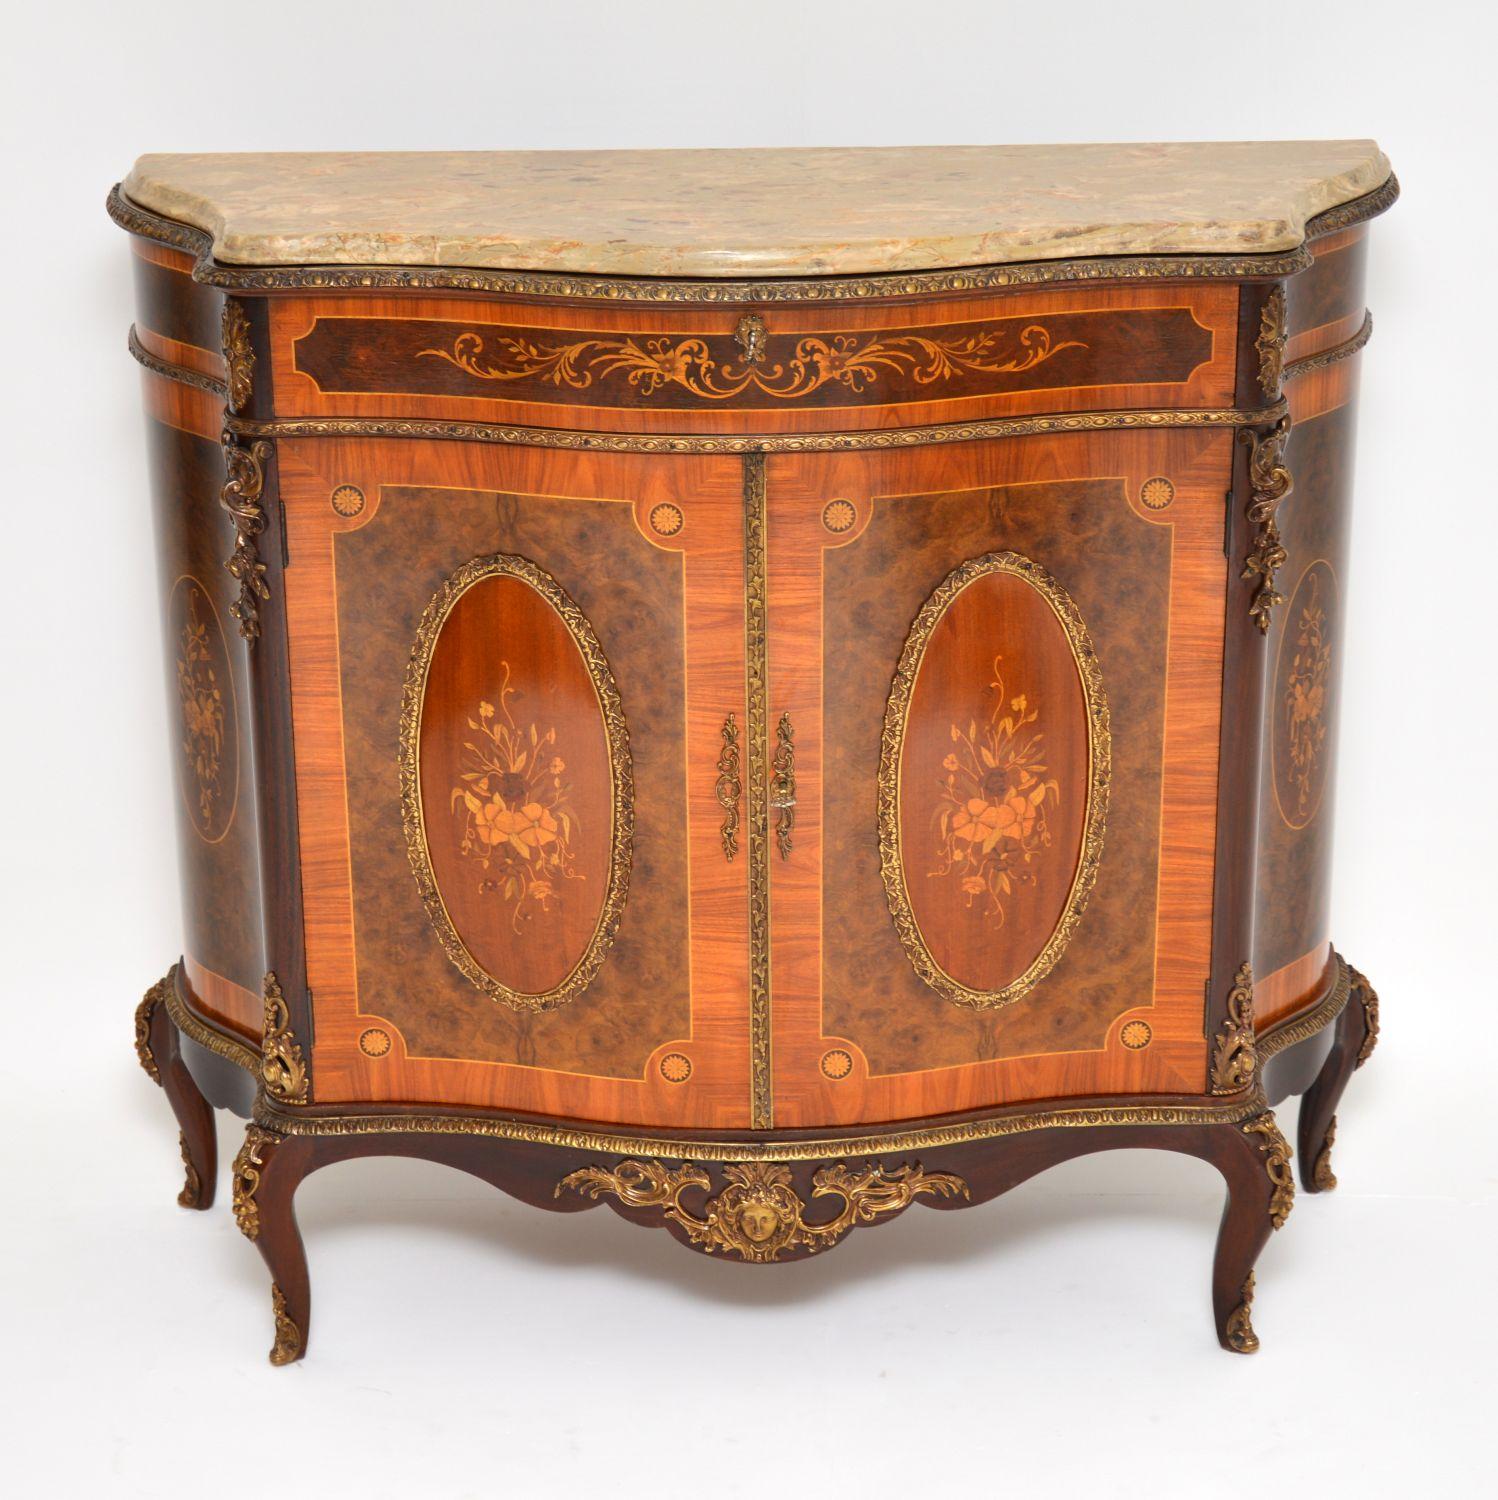 Fabulous quality and stunning looking serpentine shaped ormolu mounted cabinet, with a marble top and loads of marquetry.

There are many different woods involved, especially within the floral marquetry. The main woods are Kingwood, mahogany,